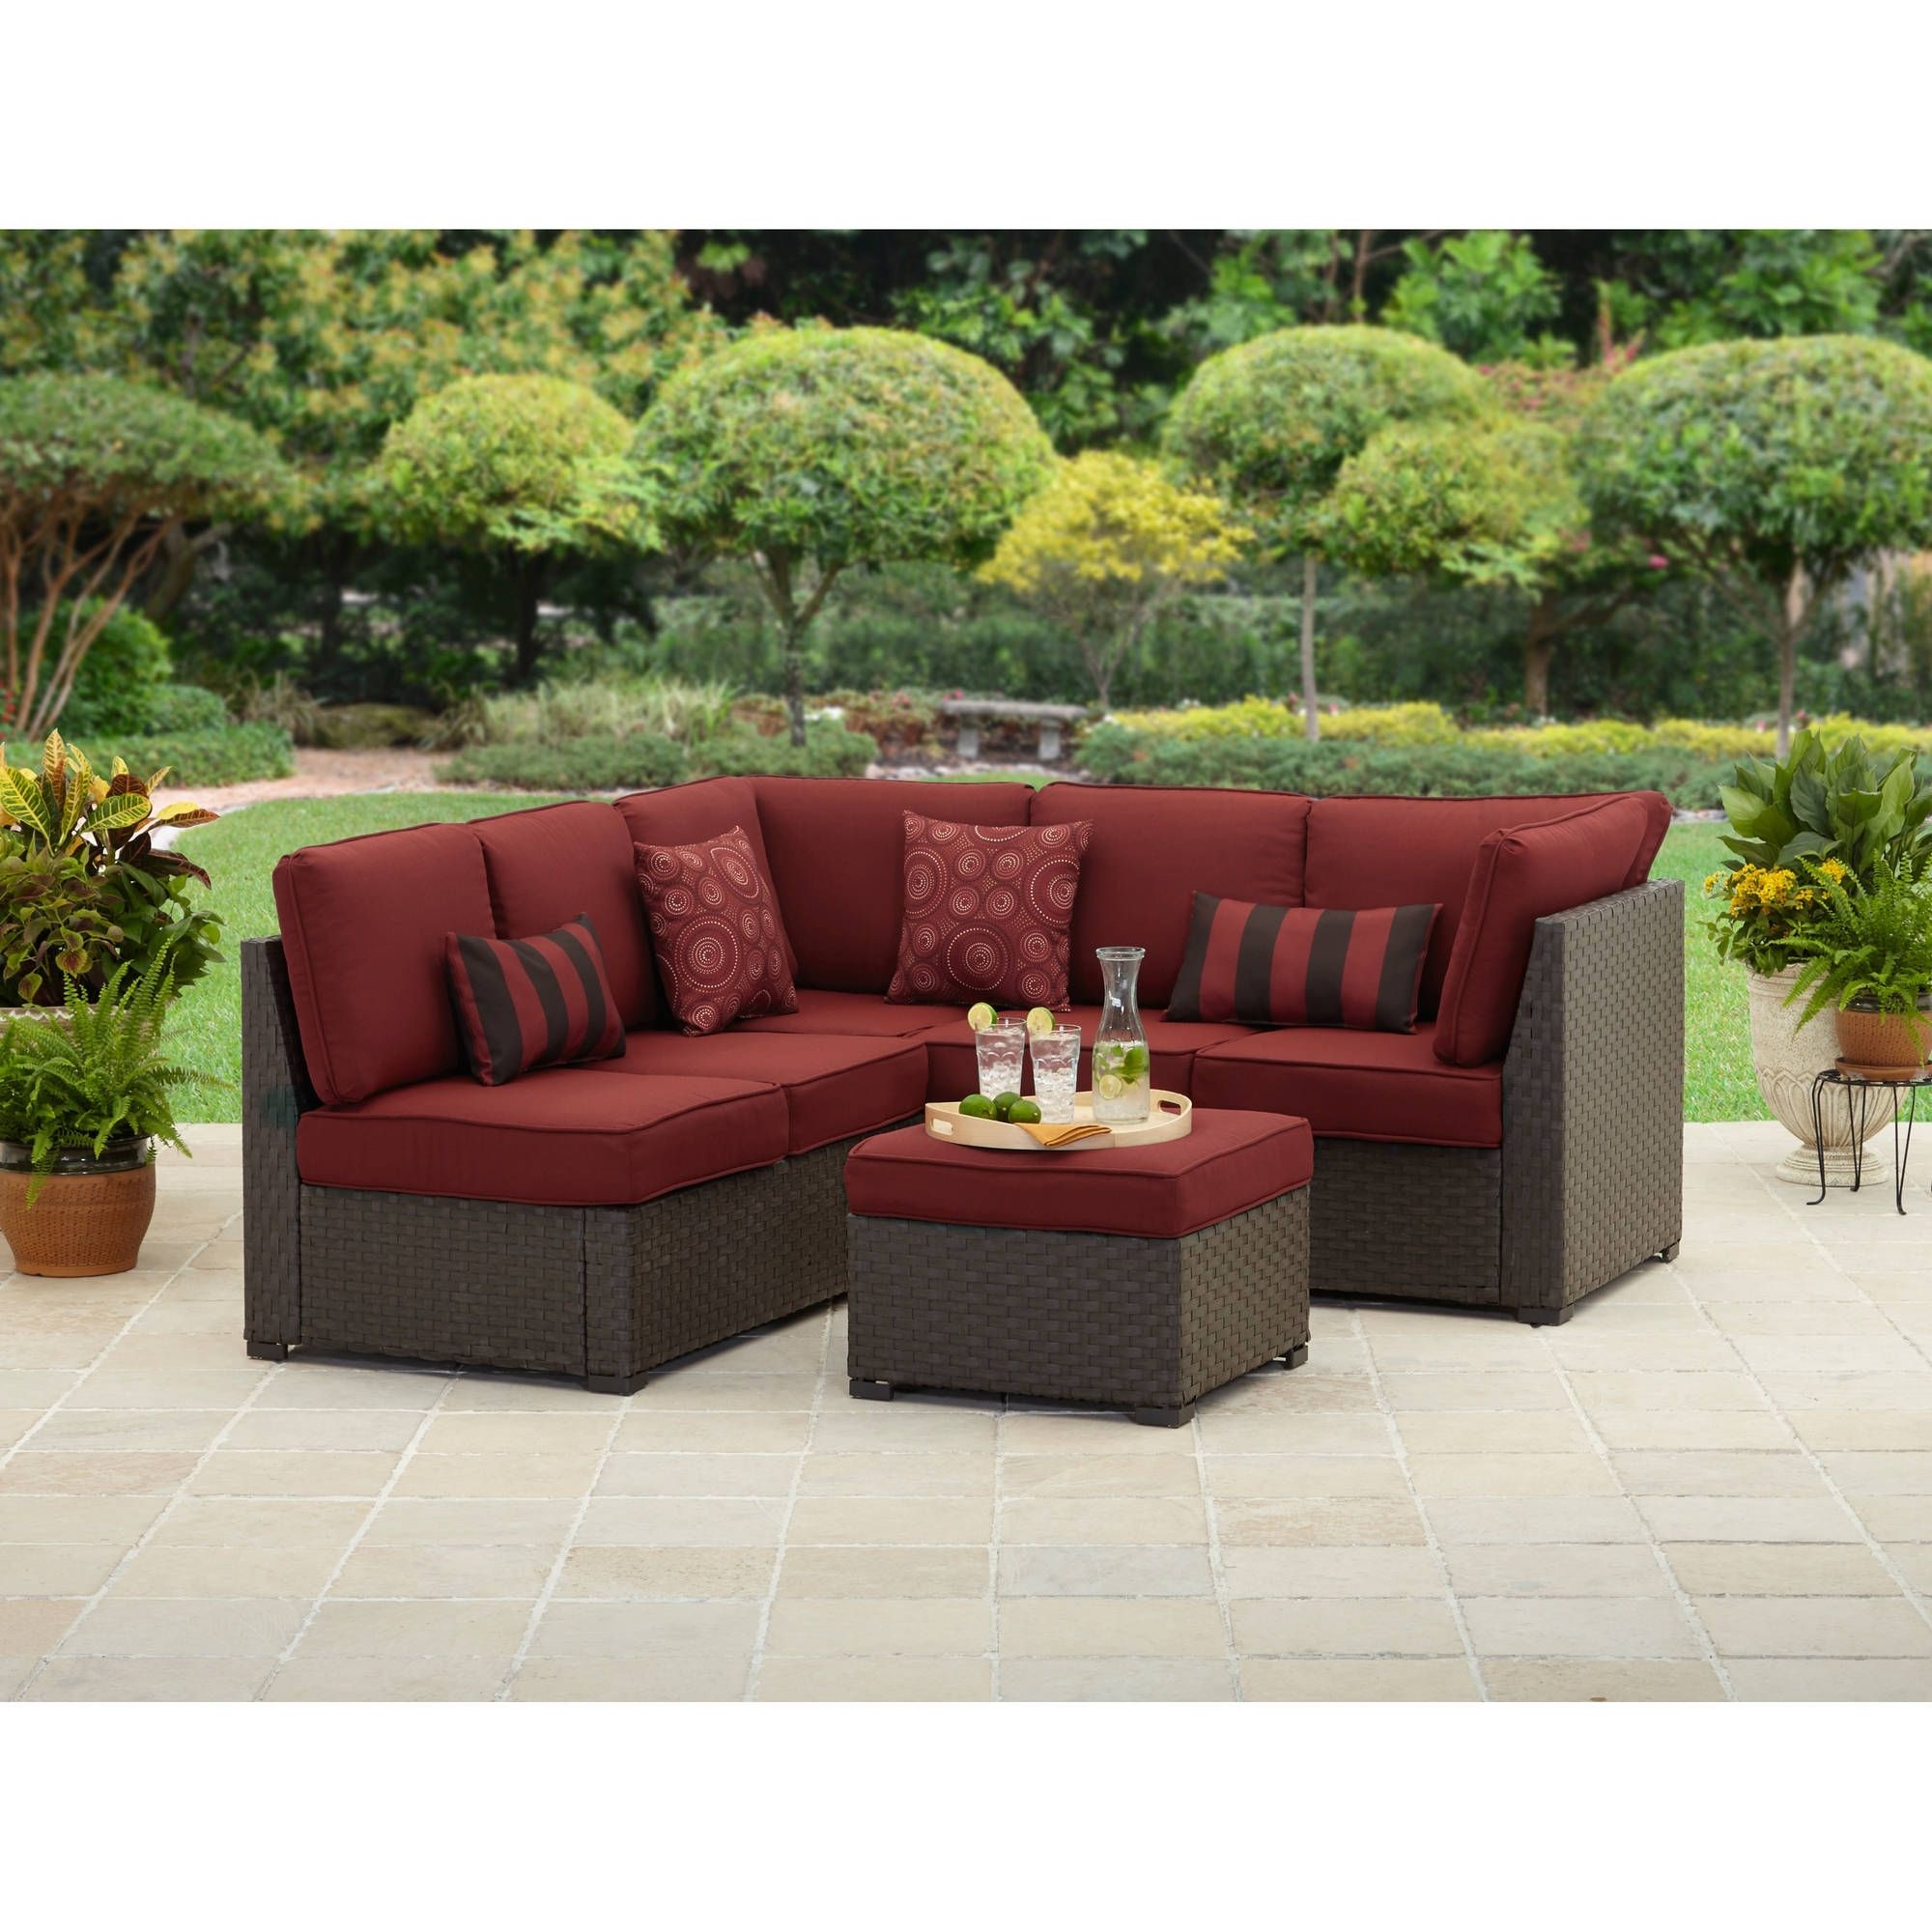 Better Homes And Gardens Rush Valley 3 Piece Outdoor Sectional Regarding Most Current 3 Piece Patio Conversation Sets (View 10 of 20)